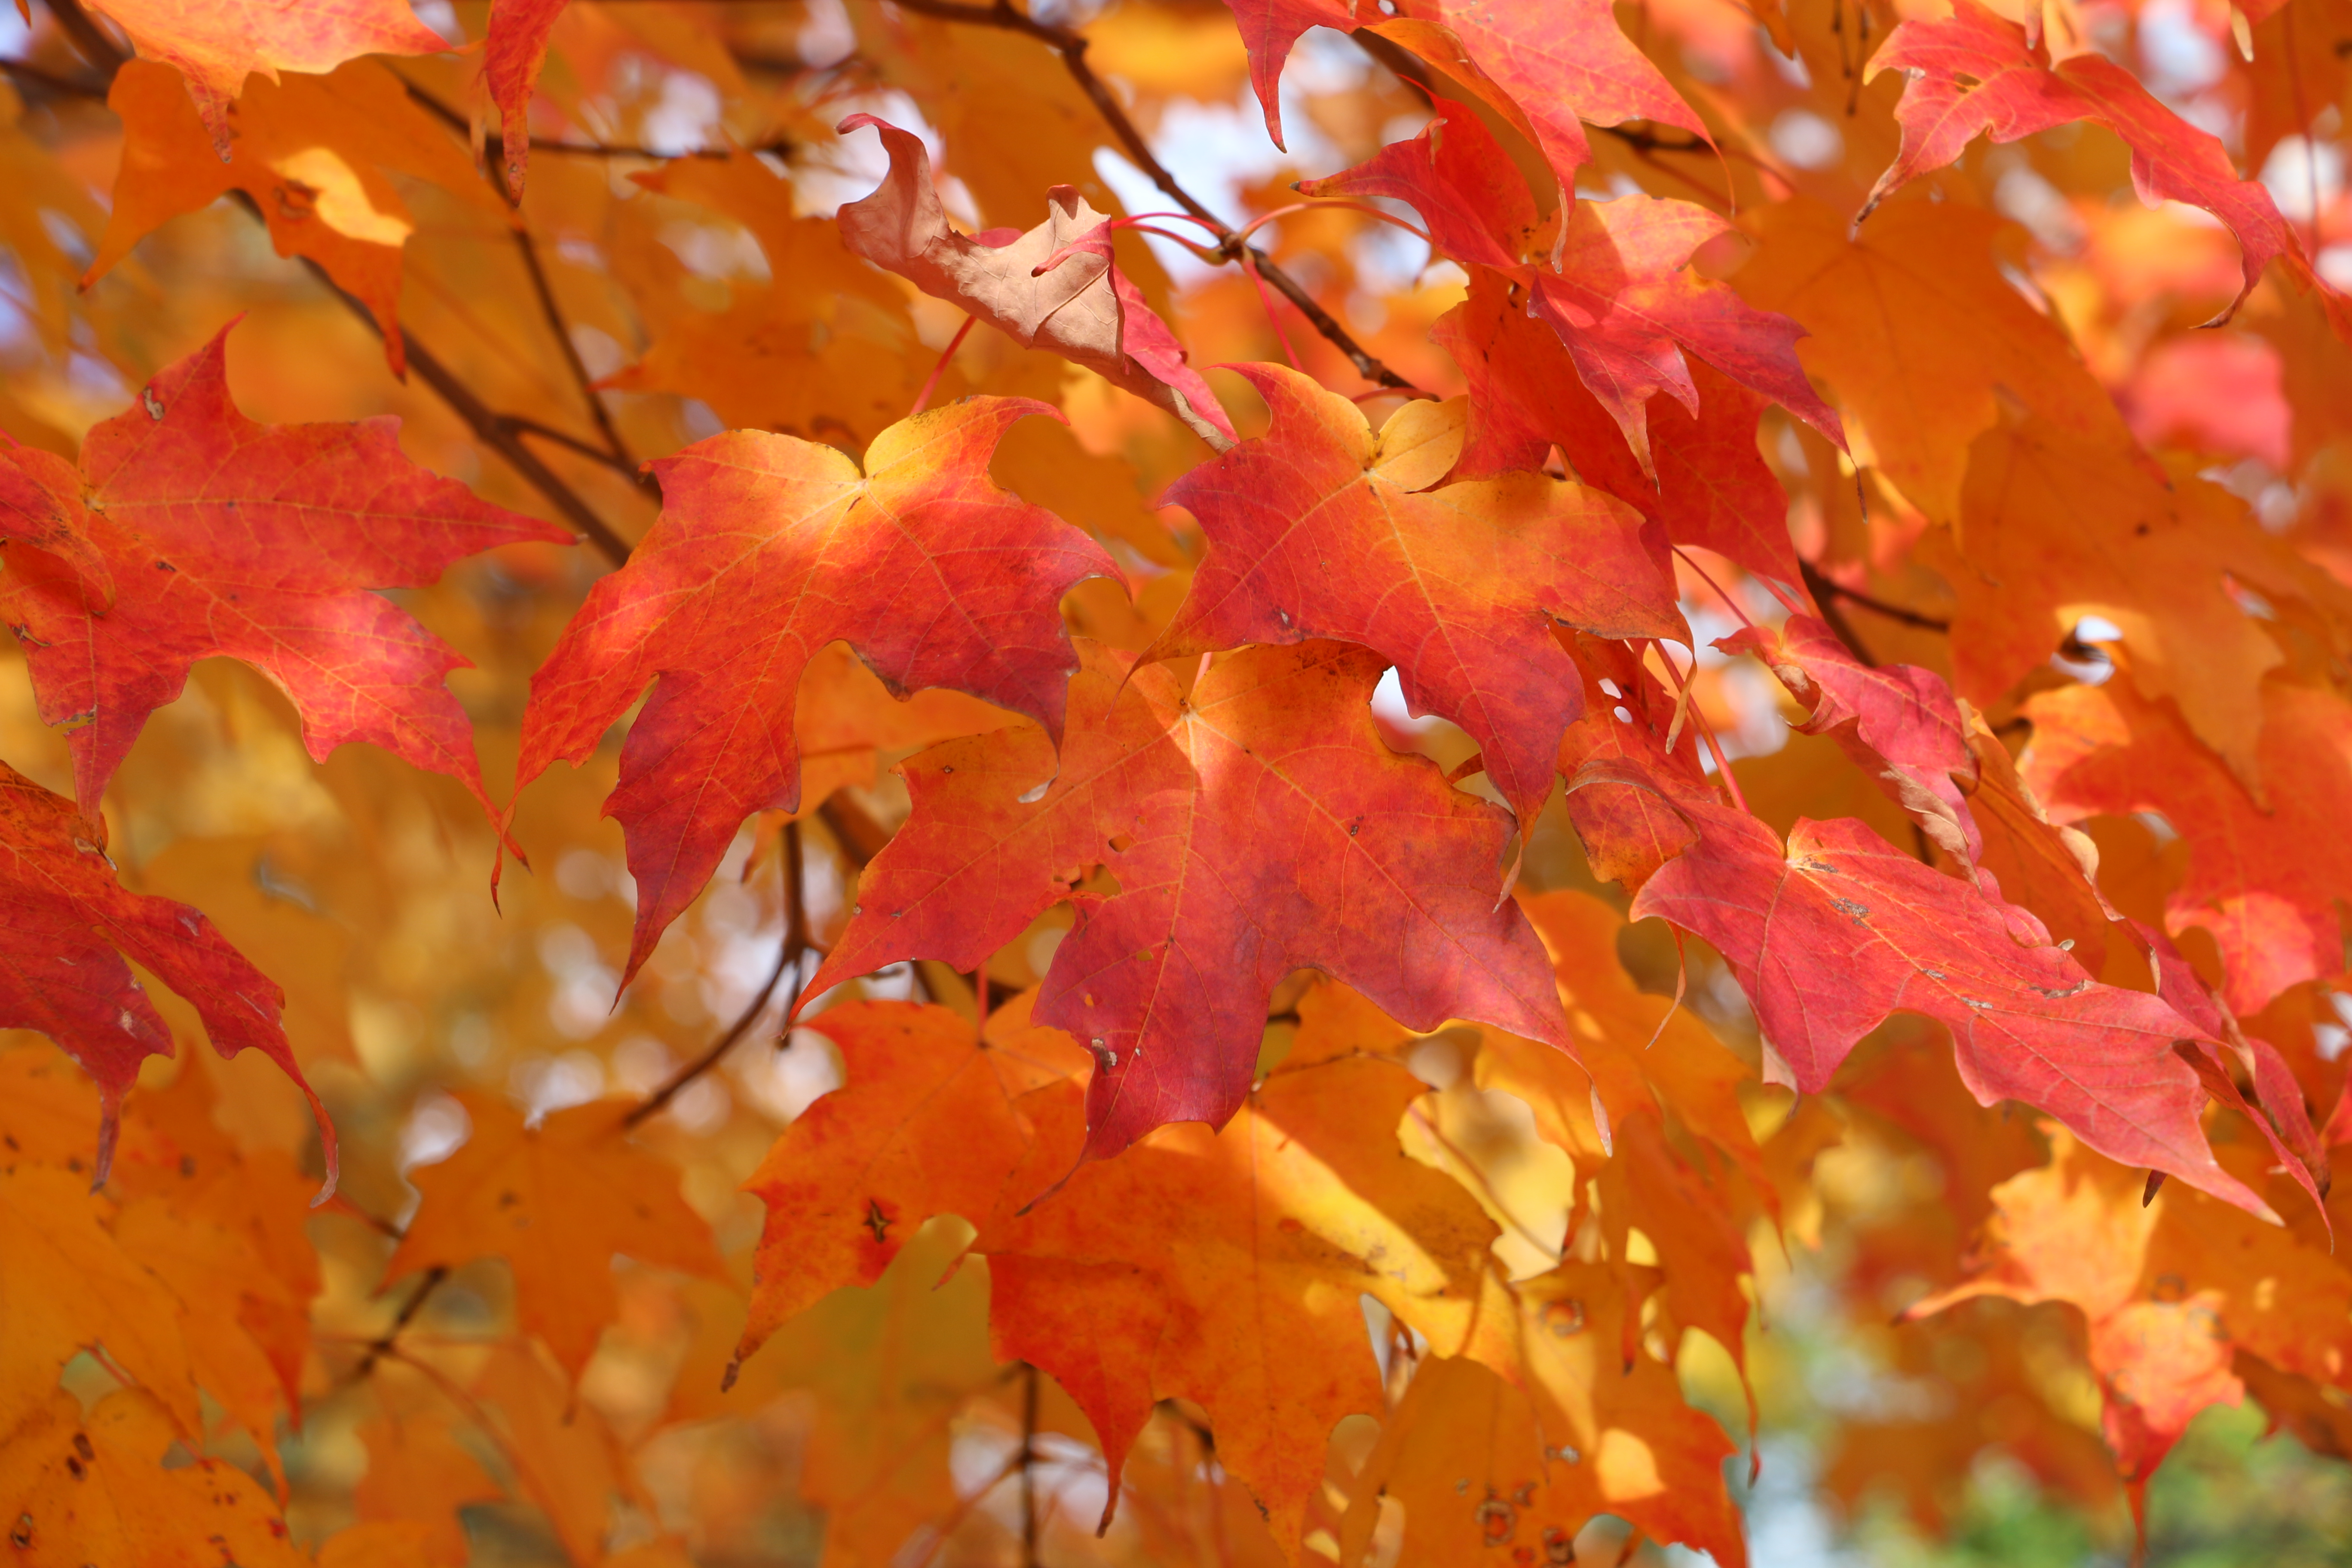 Fiery reds, oranges, and yellows of maple leaves are illuminated by sunlight